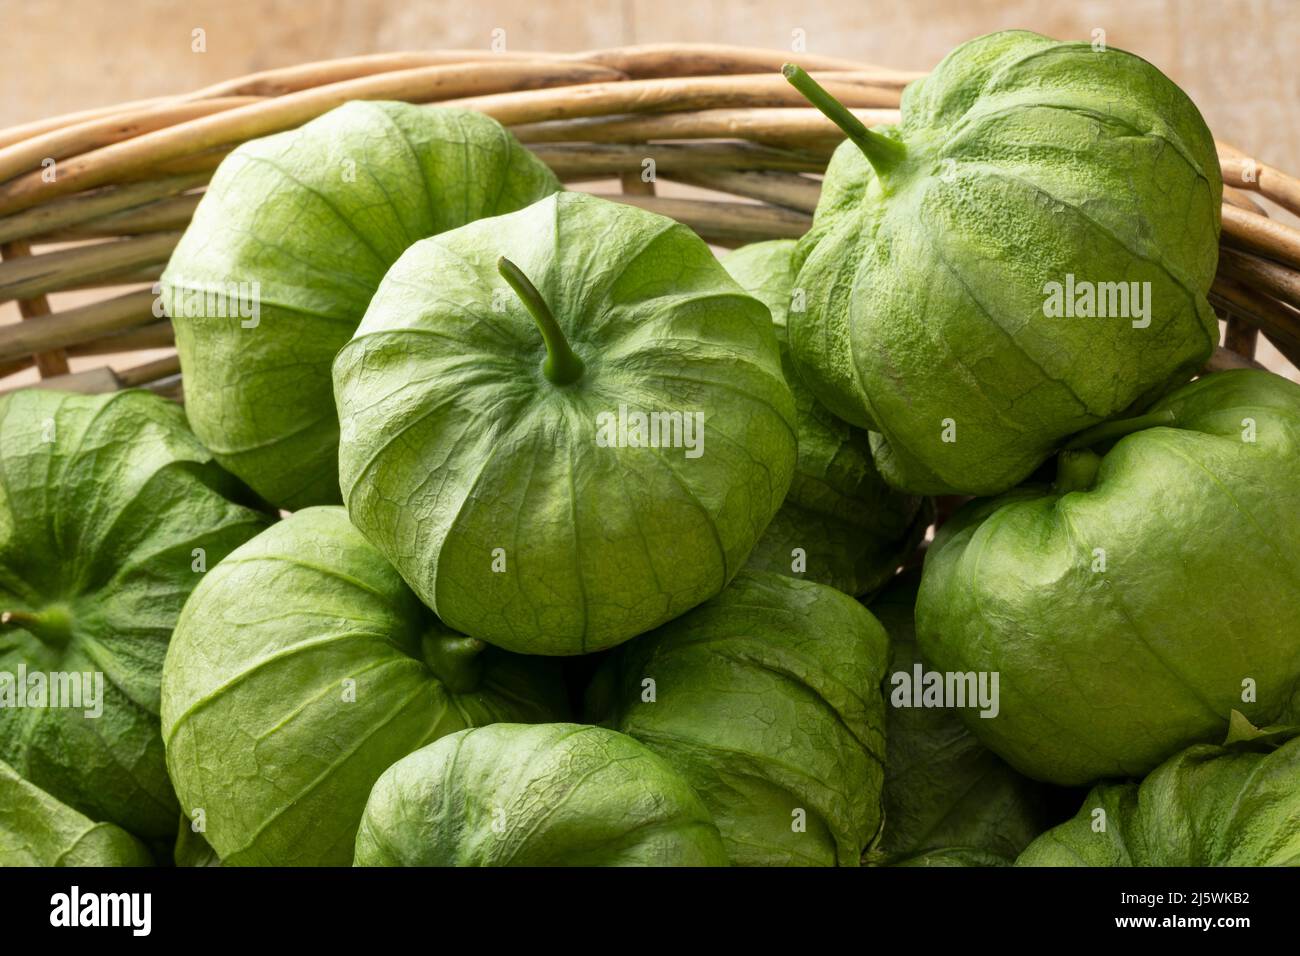 Basket with fresh green Mexican tomatillo in a husk close up Stock Photo